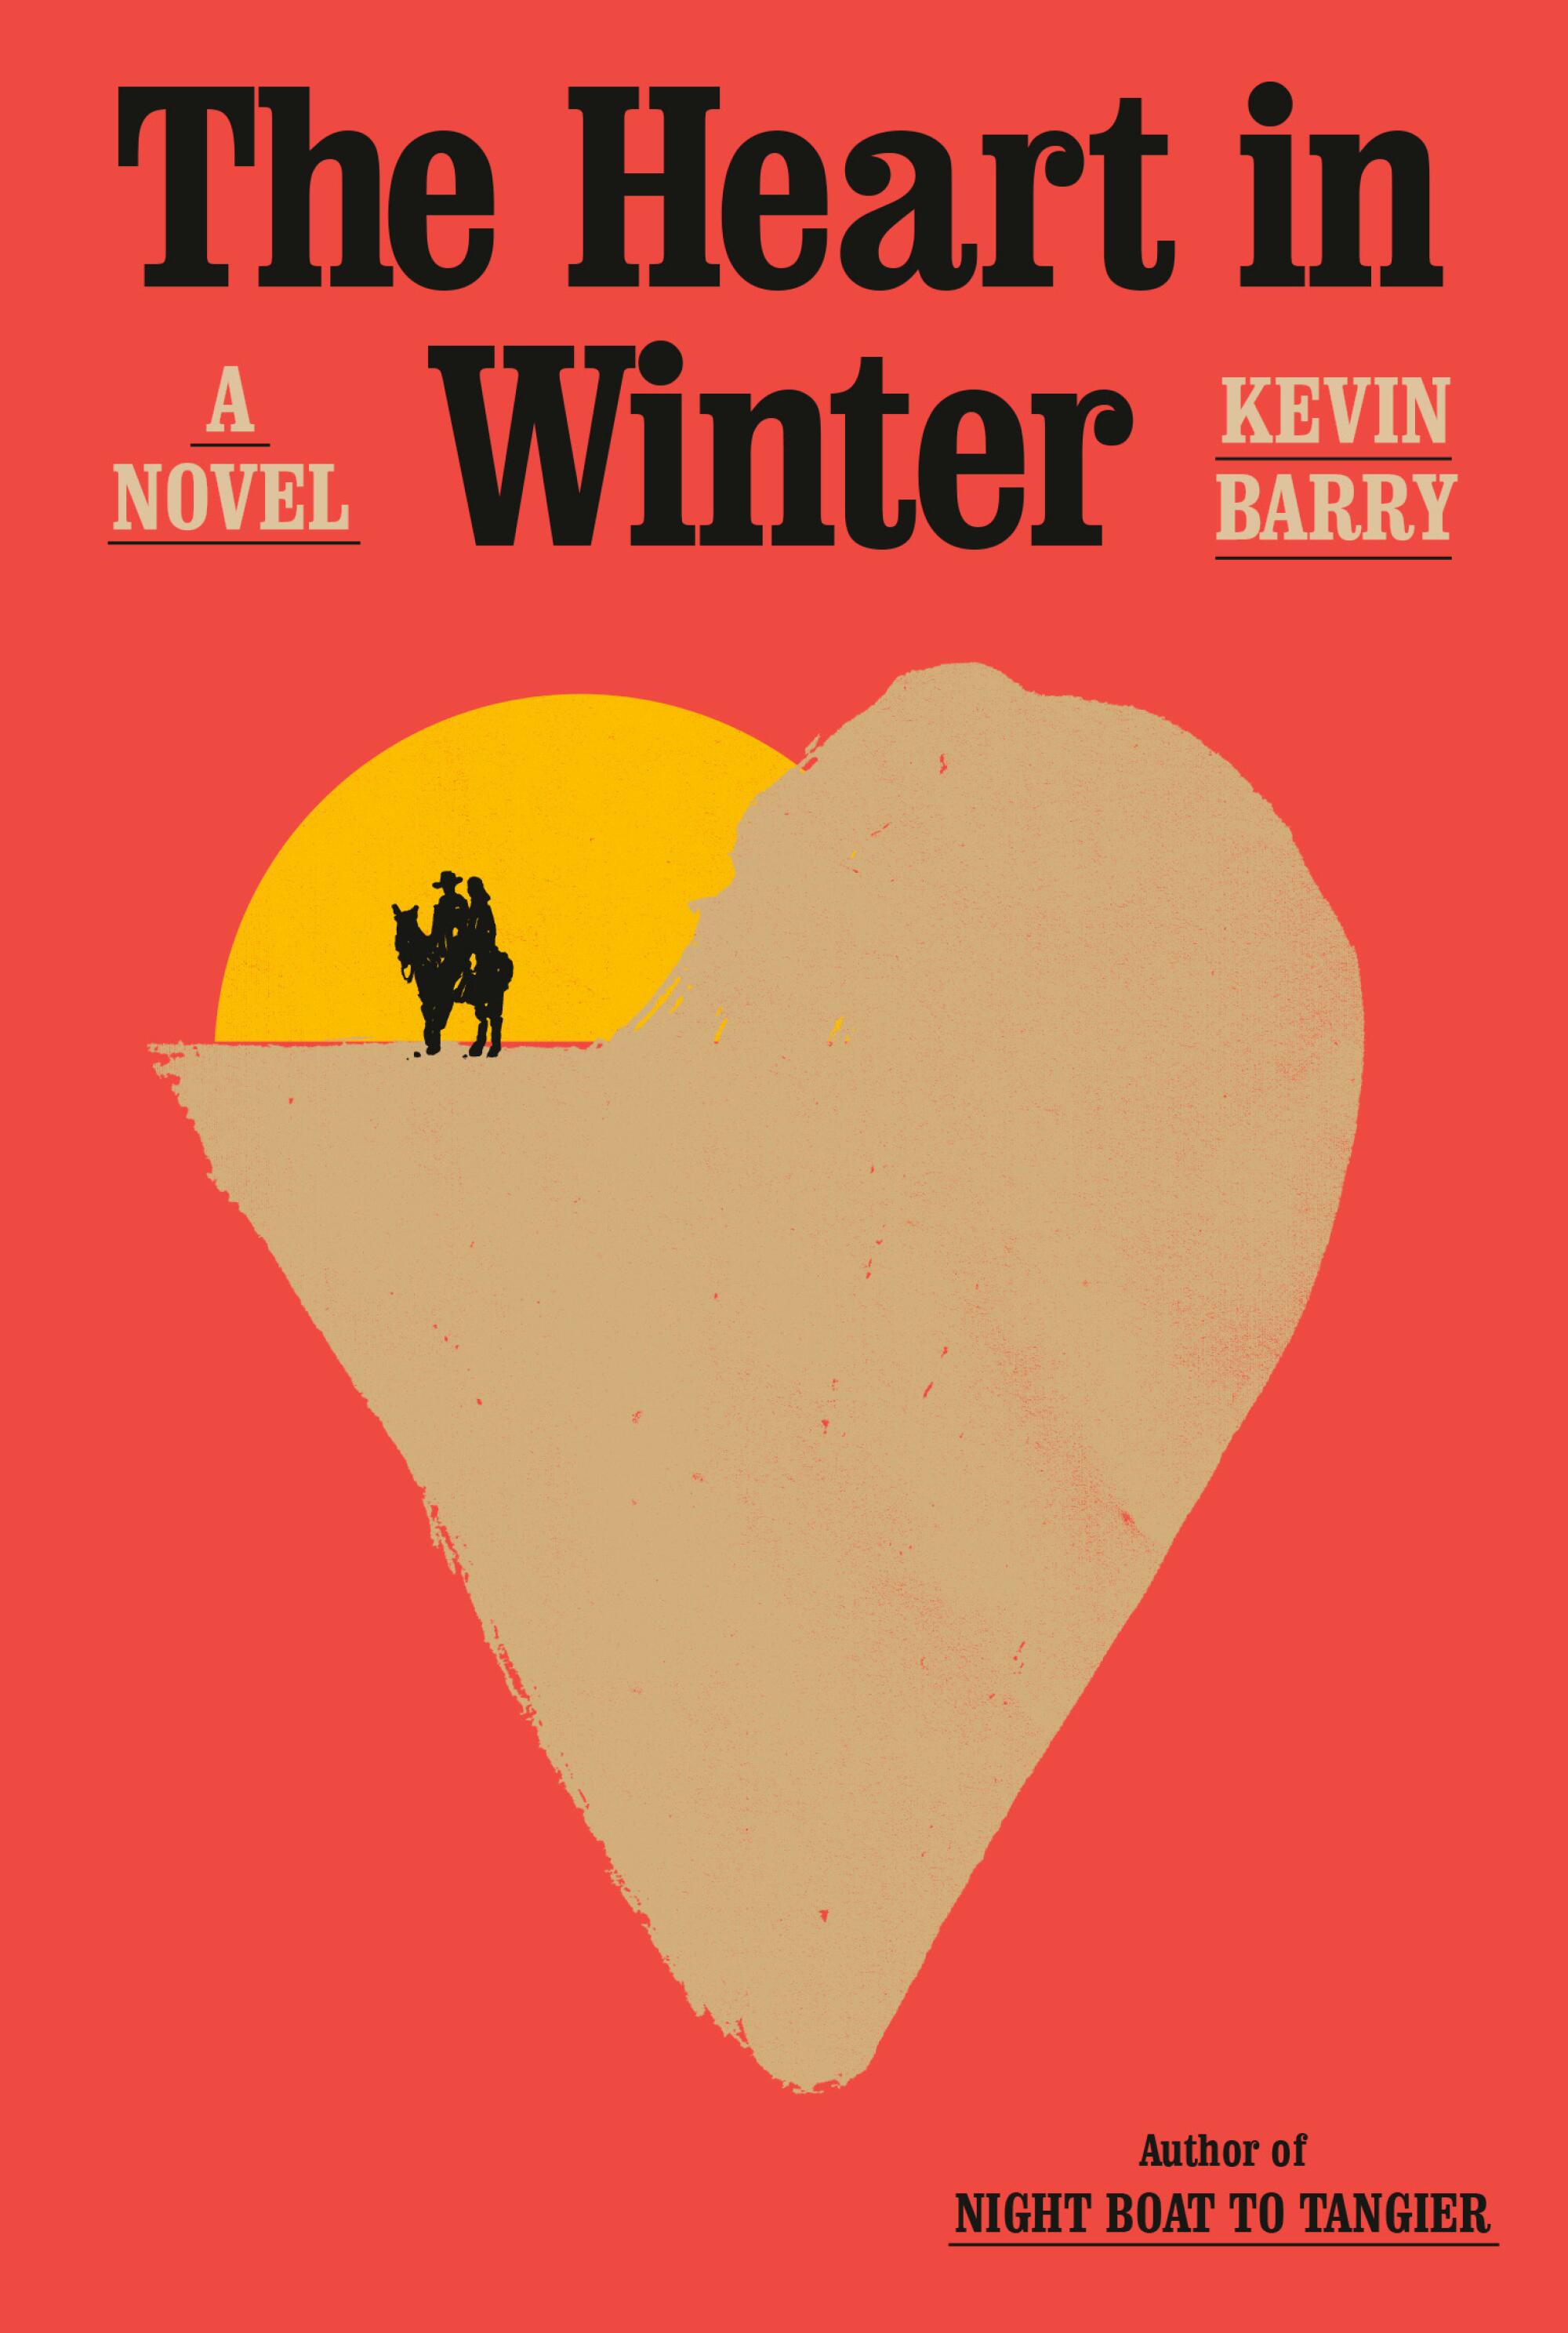 "The Heart in Winter" by Kevin Barry